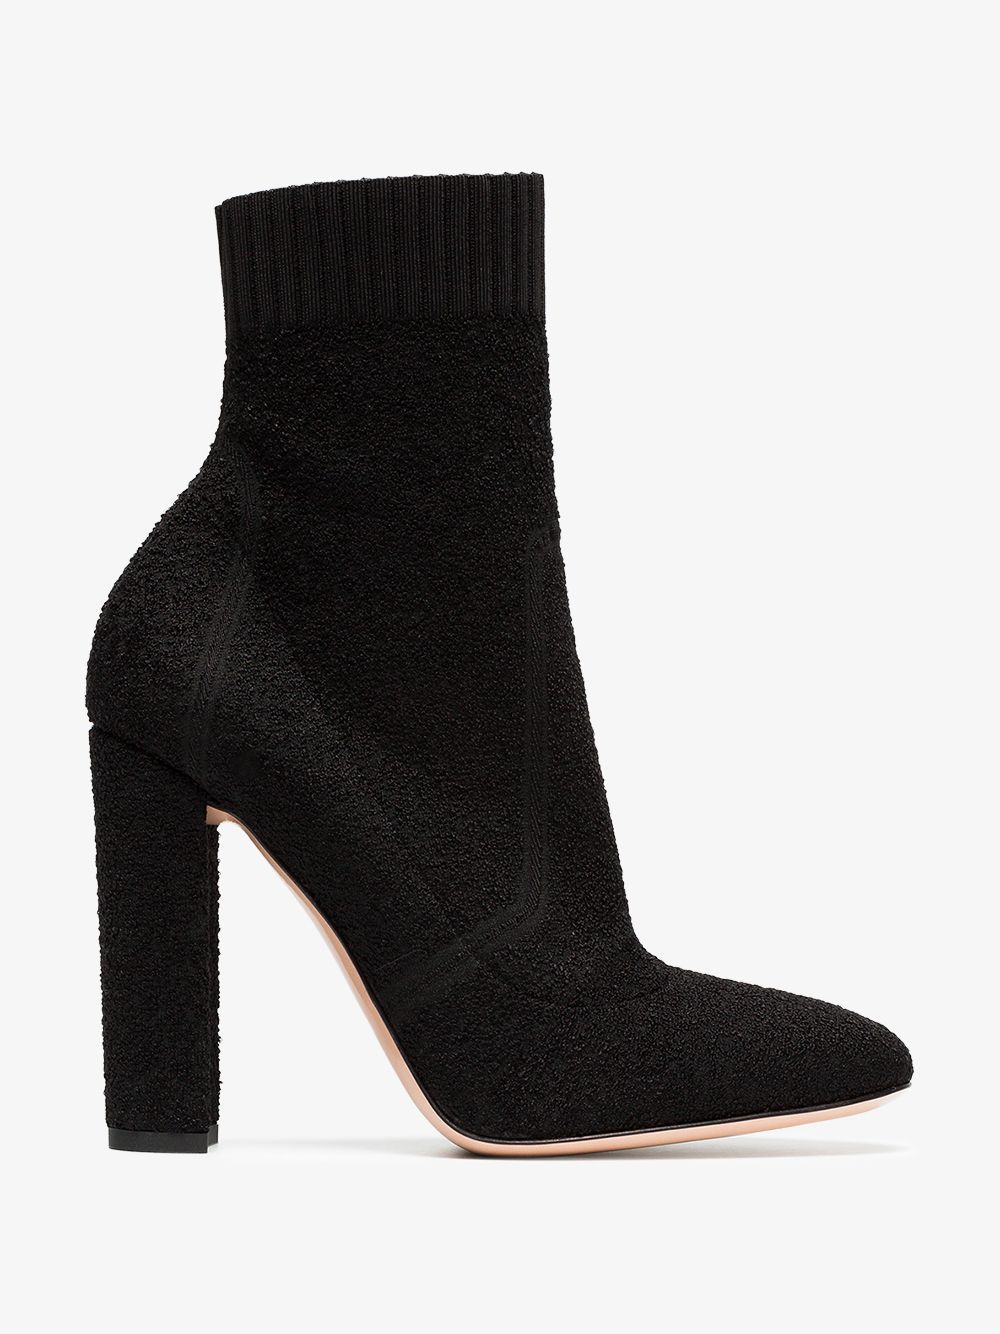 Gianvito Rossi black sock 105 leather ankle boots | Browns Fashion